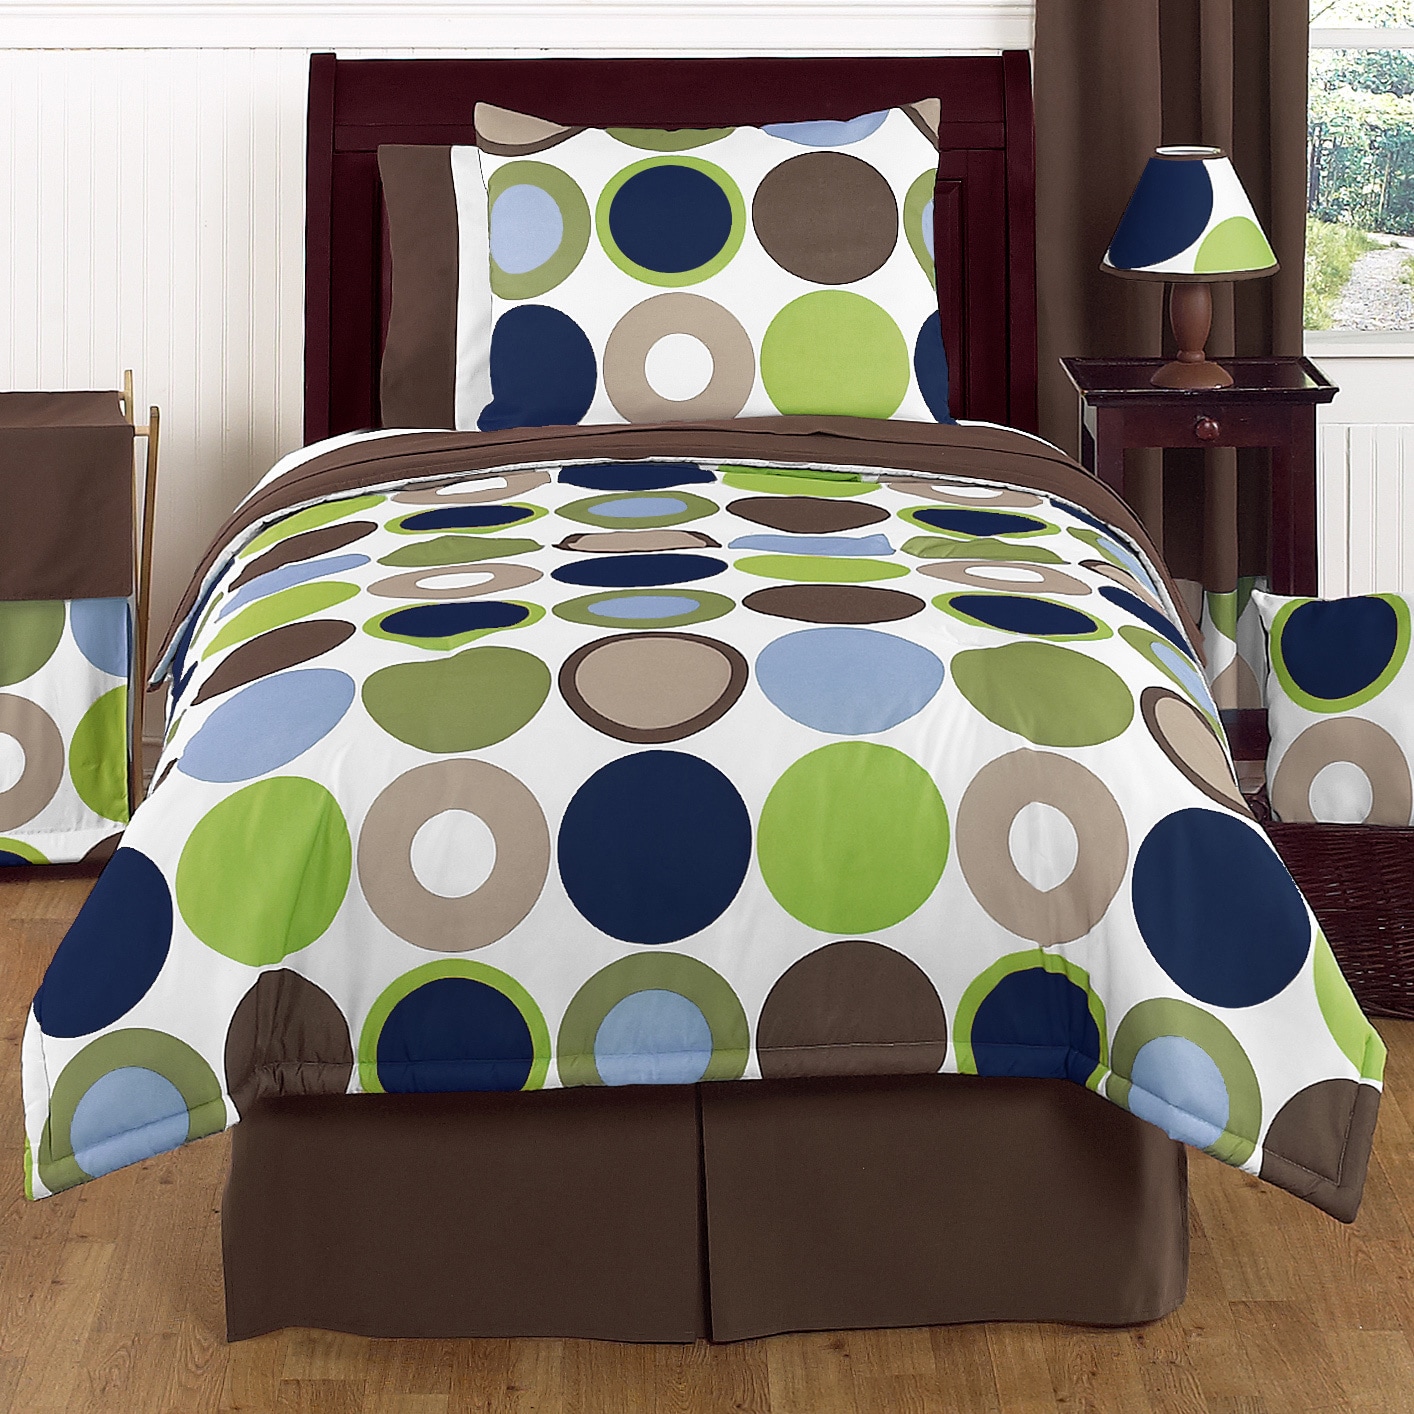 Sweet Jojo Designs Boys Dot Modern 4 piece Twin Comforter Set (Navy/ steel blue/ green/ brownFill material PolyesterCare instructions Machine washableComforter 62 inches wide x 86 inches longSham 20 inches wide x 26 inches longBedskirt 39 inches wide